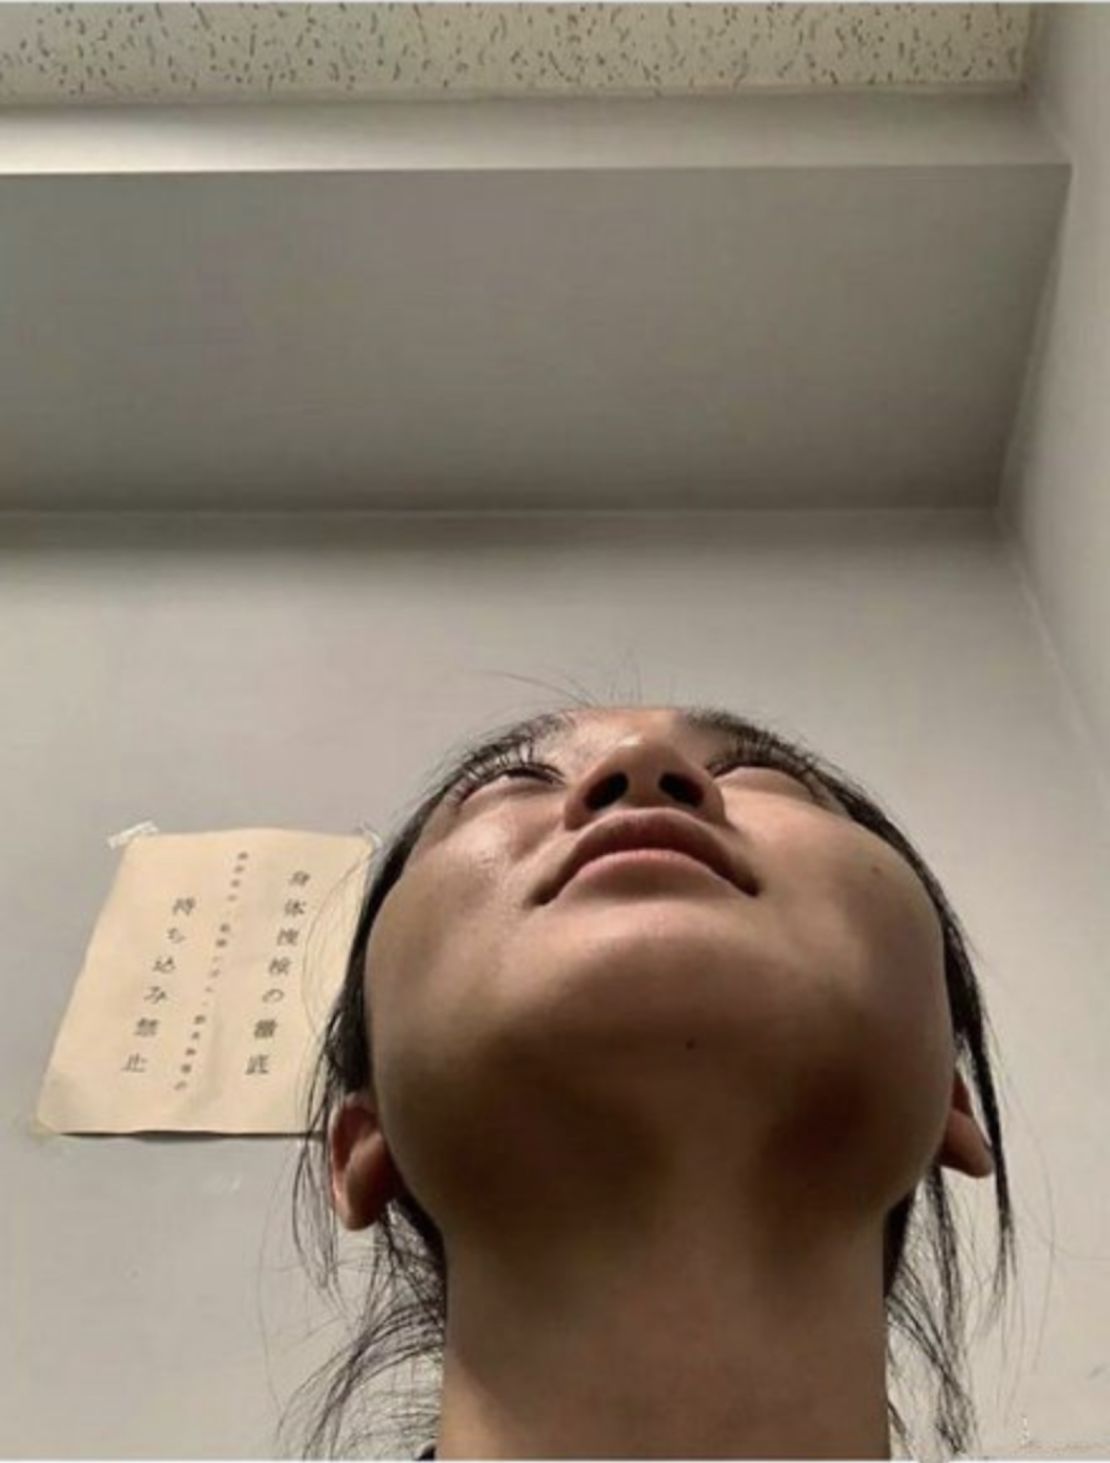 An image from Haruka Nakaura's Instagram account, showing bruising on her neck.